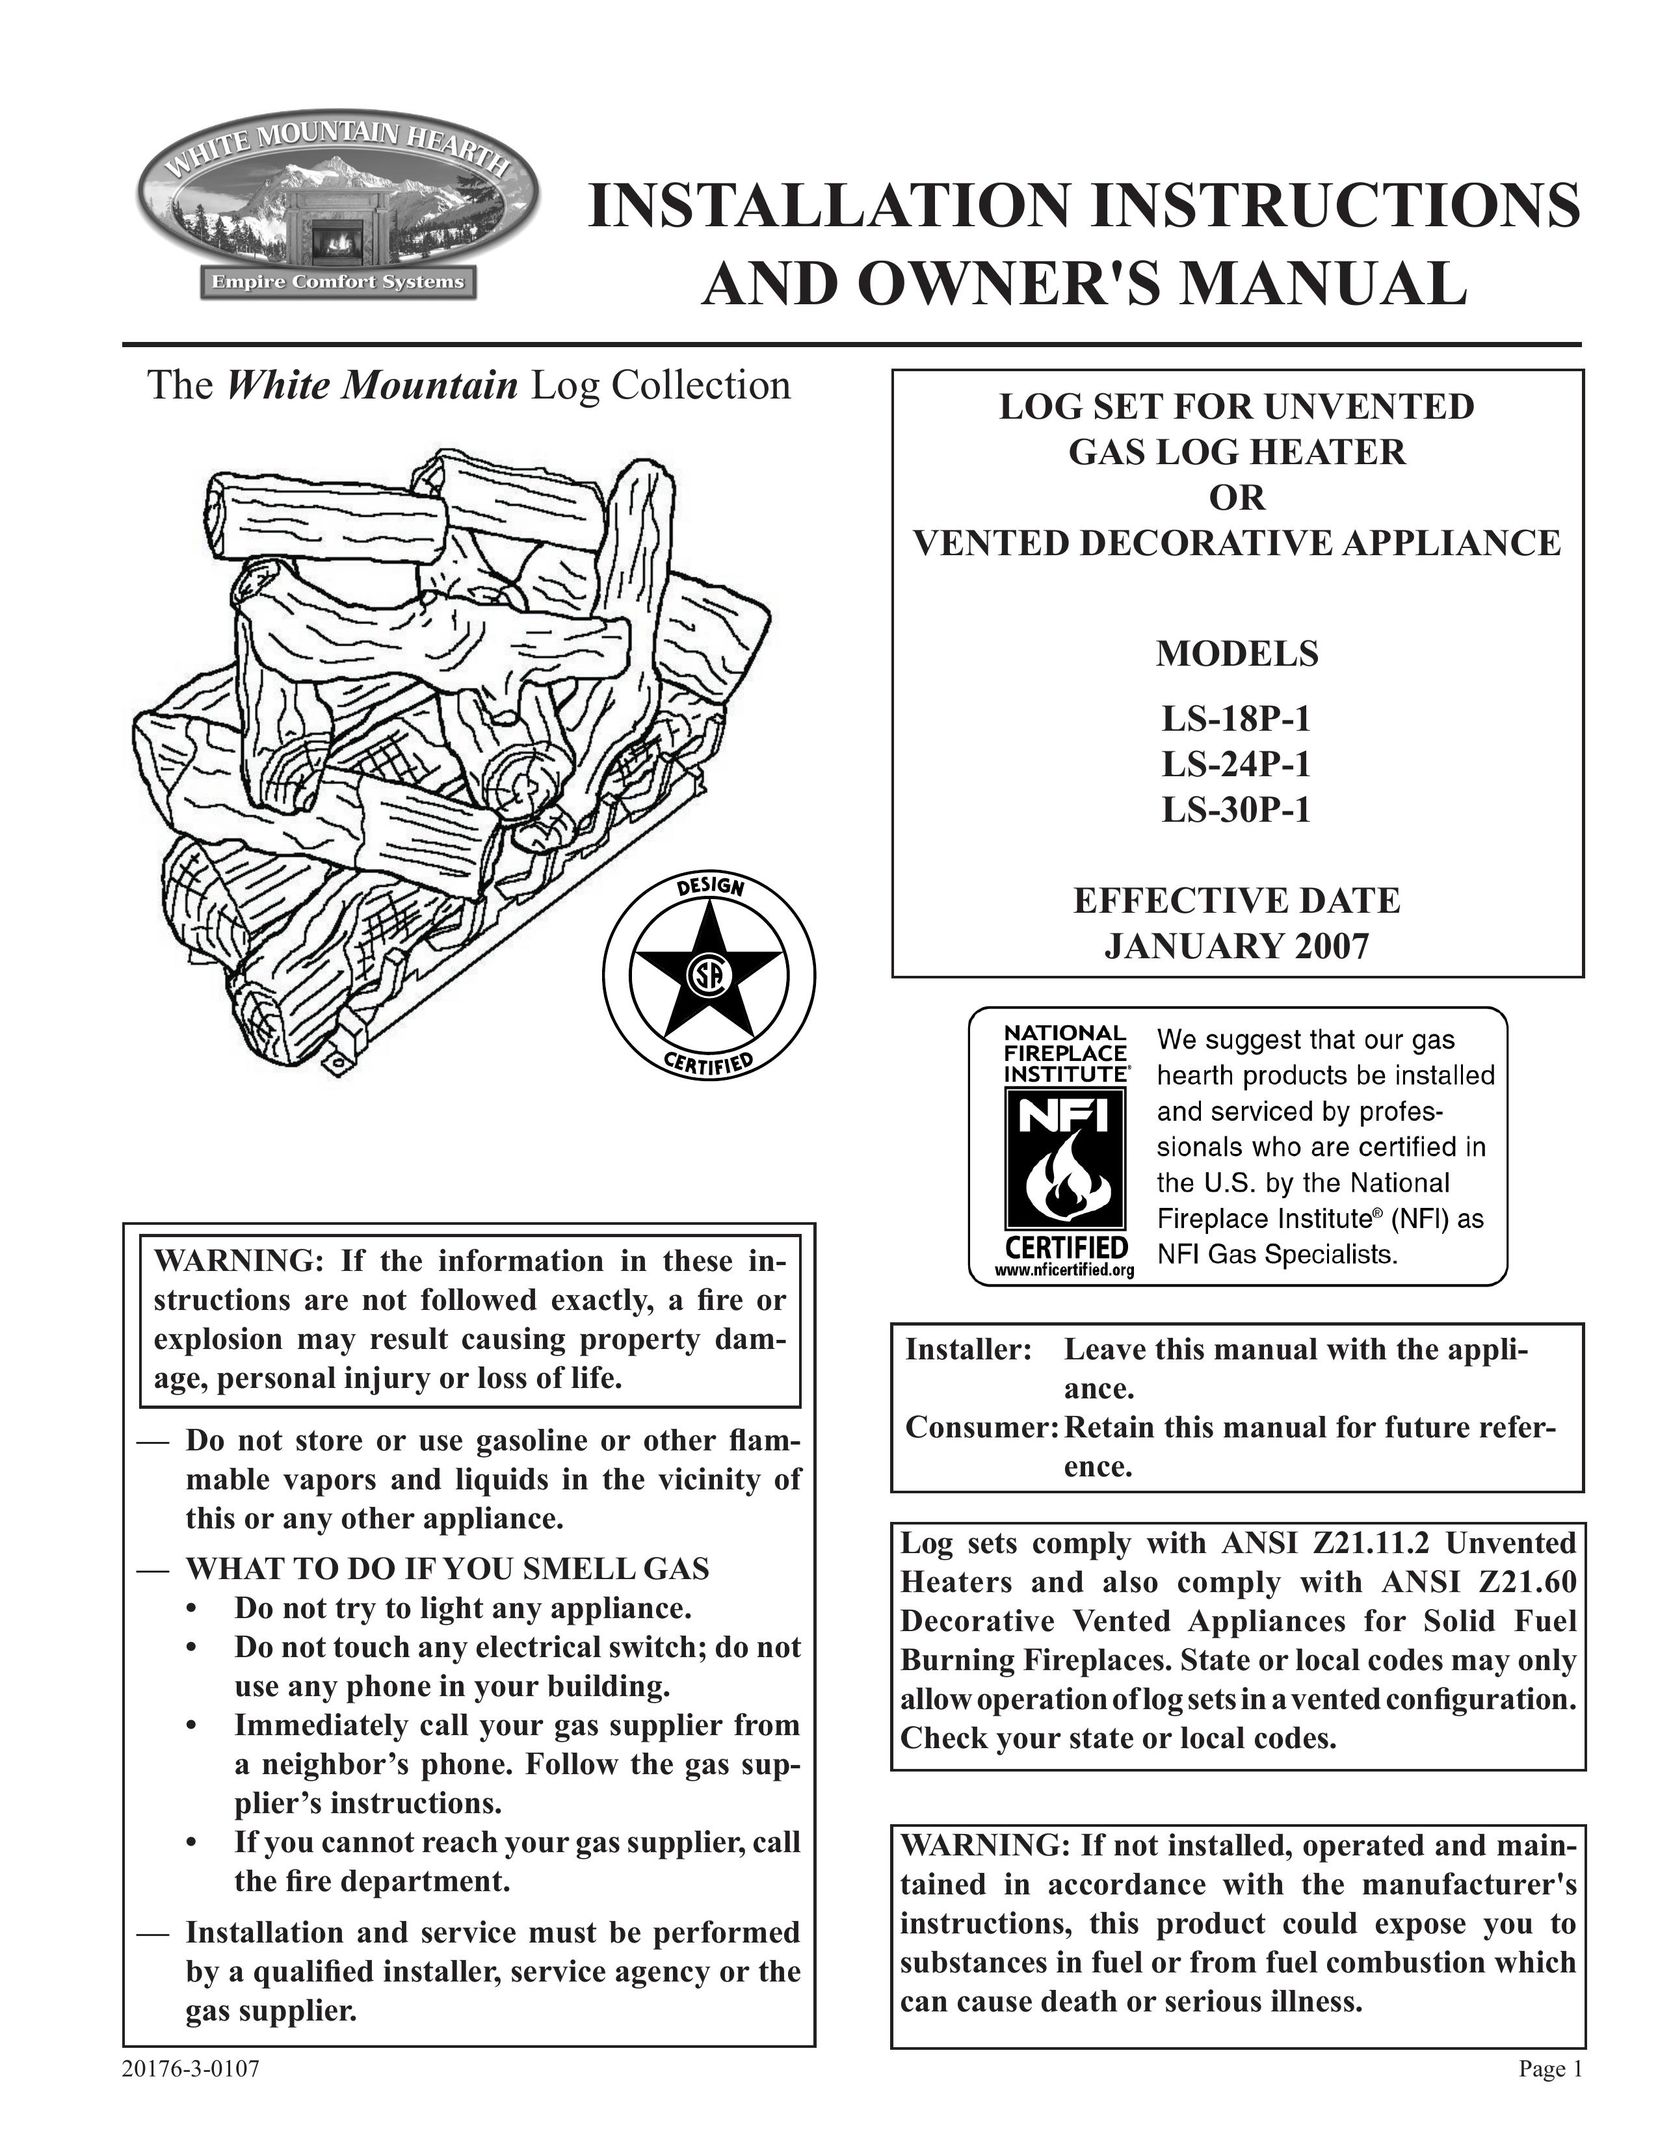 Empire Comfort Systems LS-30P-1 Electric Heater User Manual